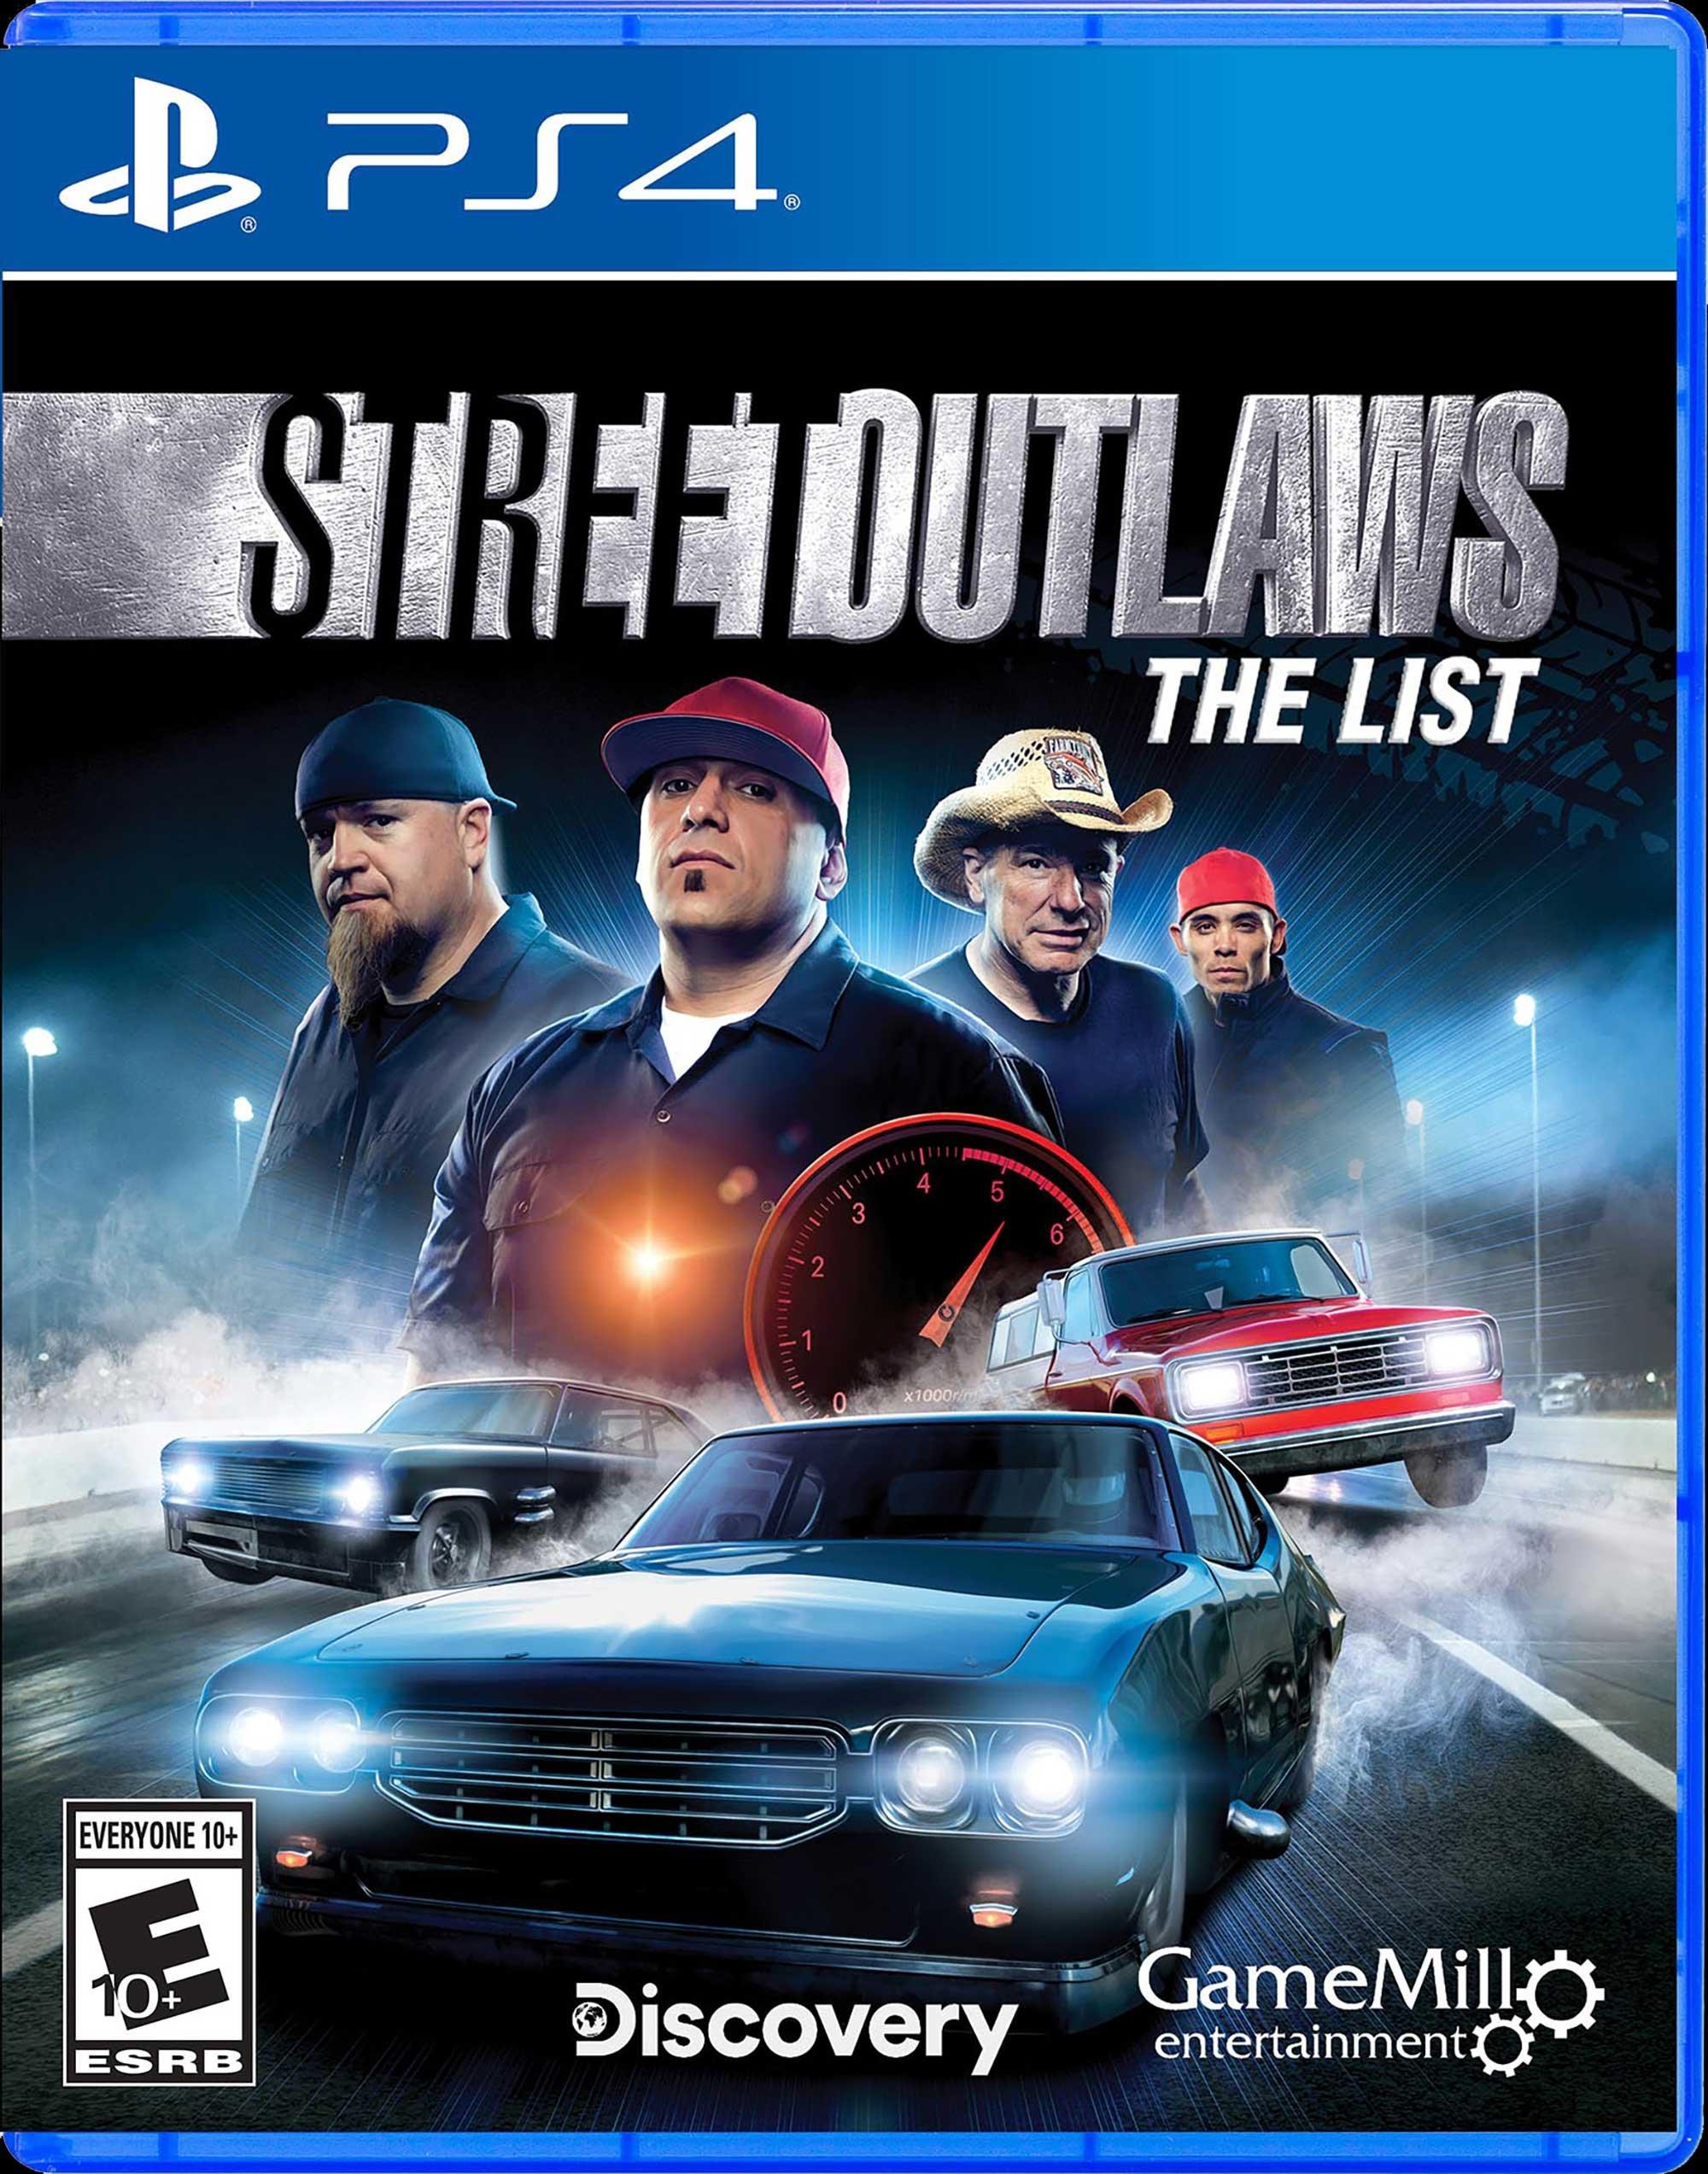 street outlaws xbox one release date